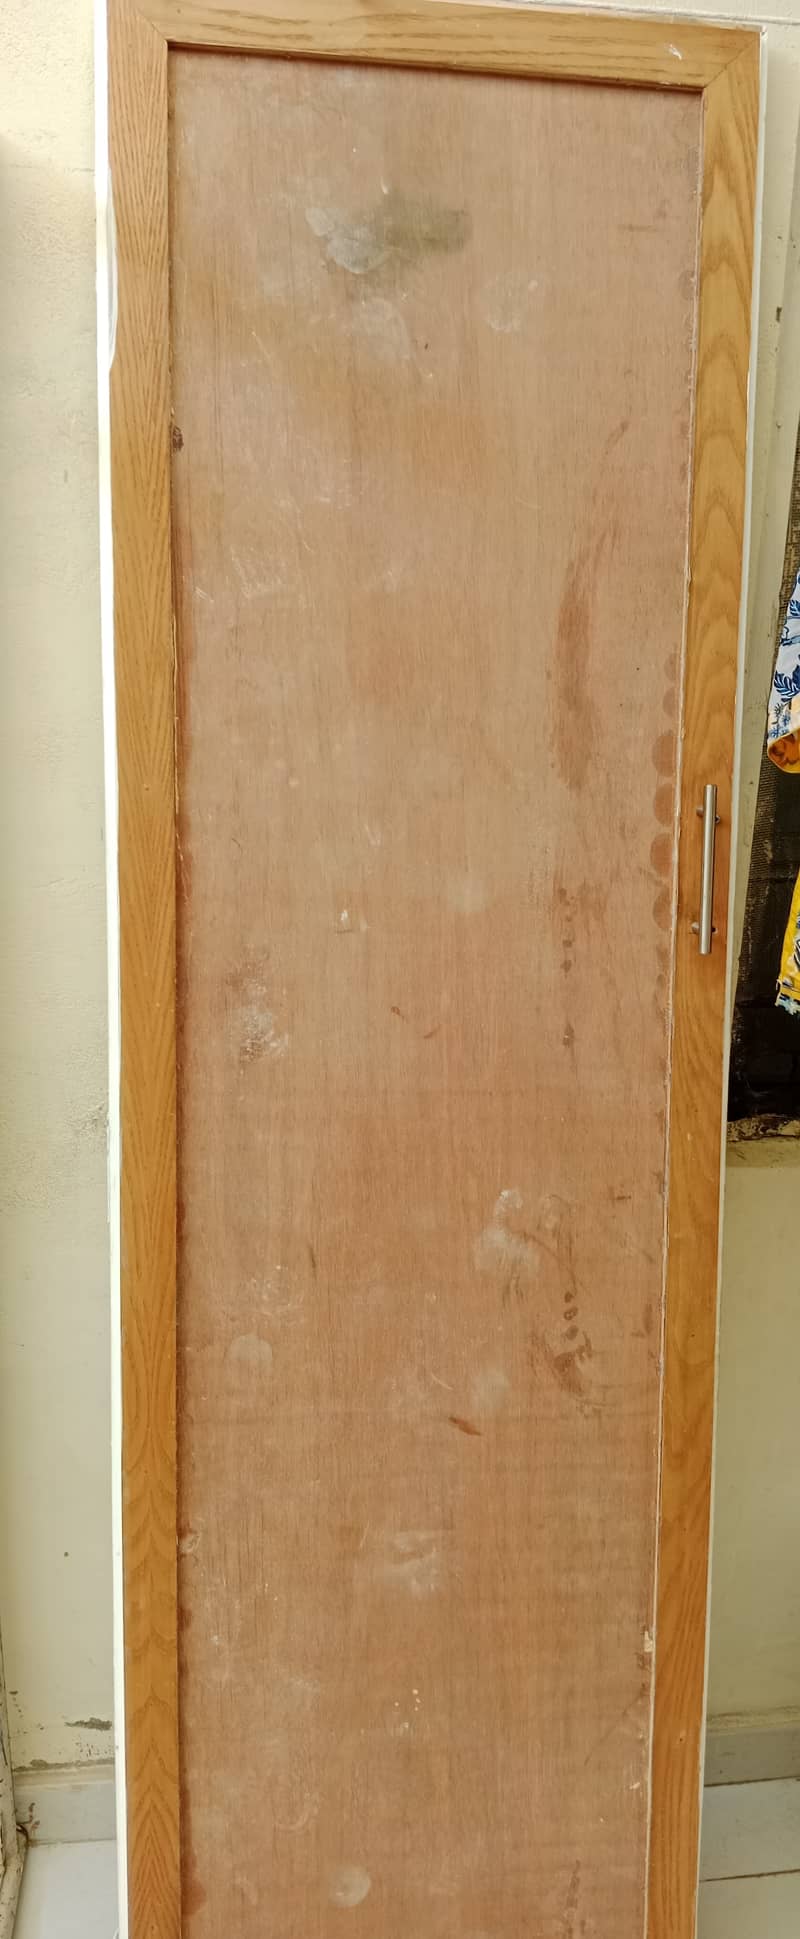 Door for sale neat and clean only WhatsUp 03060103003 18